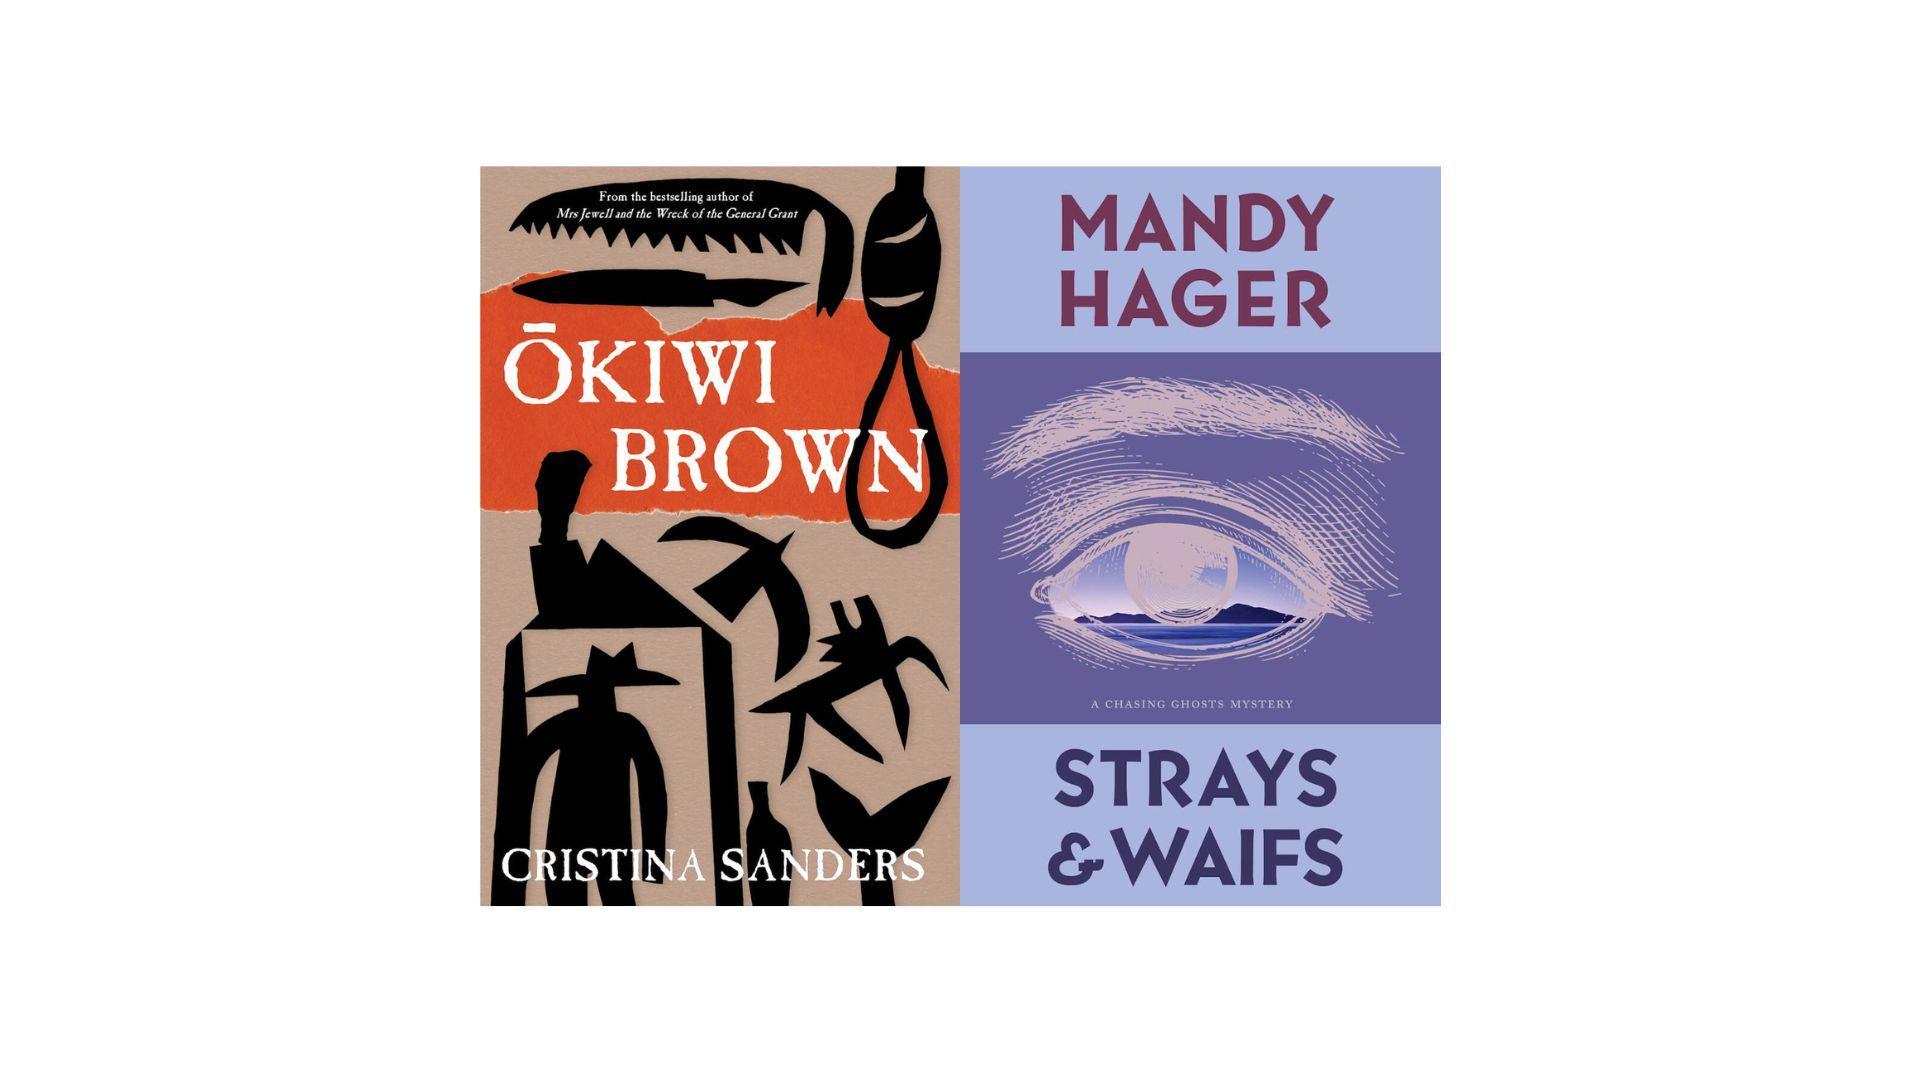 Double Book Launch: Ōkiwi Brown by Cristina Sanders - Strays & Waifs by Mandy Hager